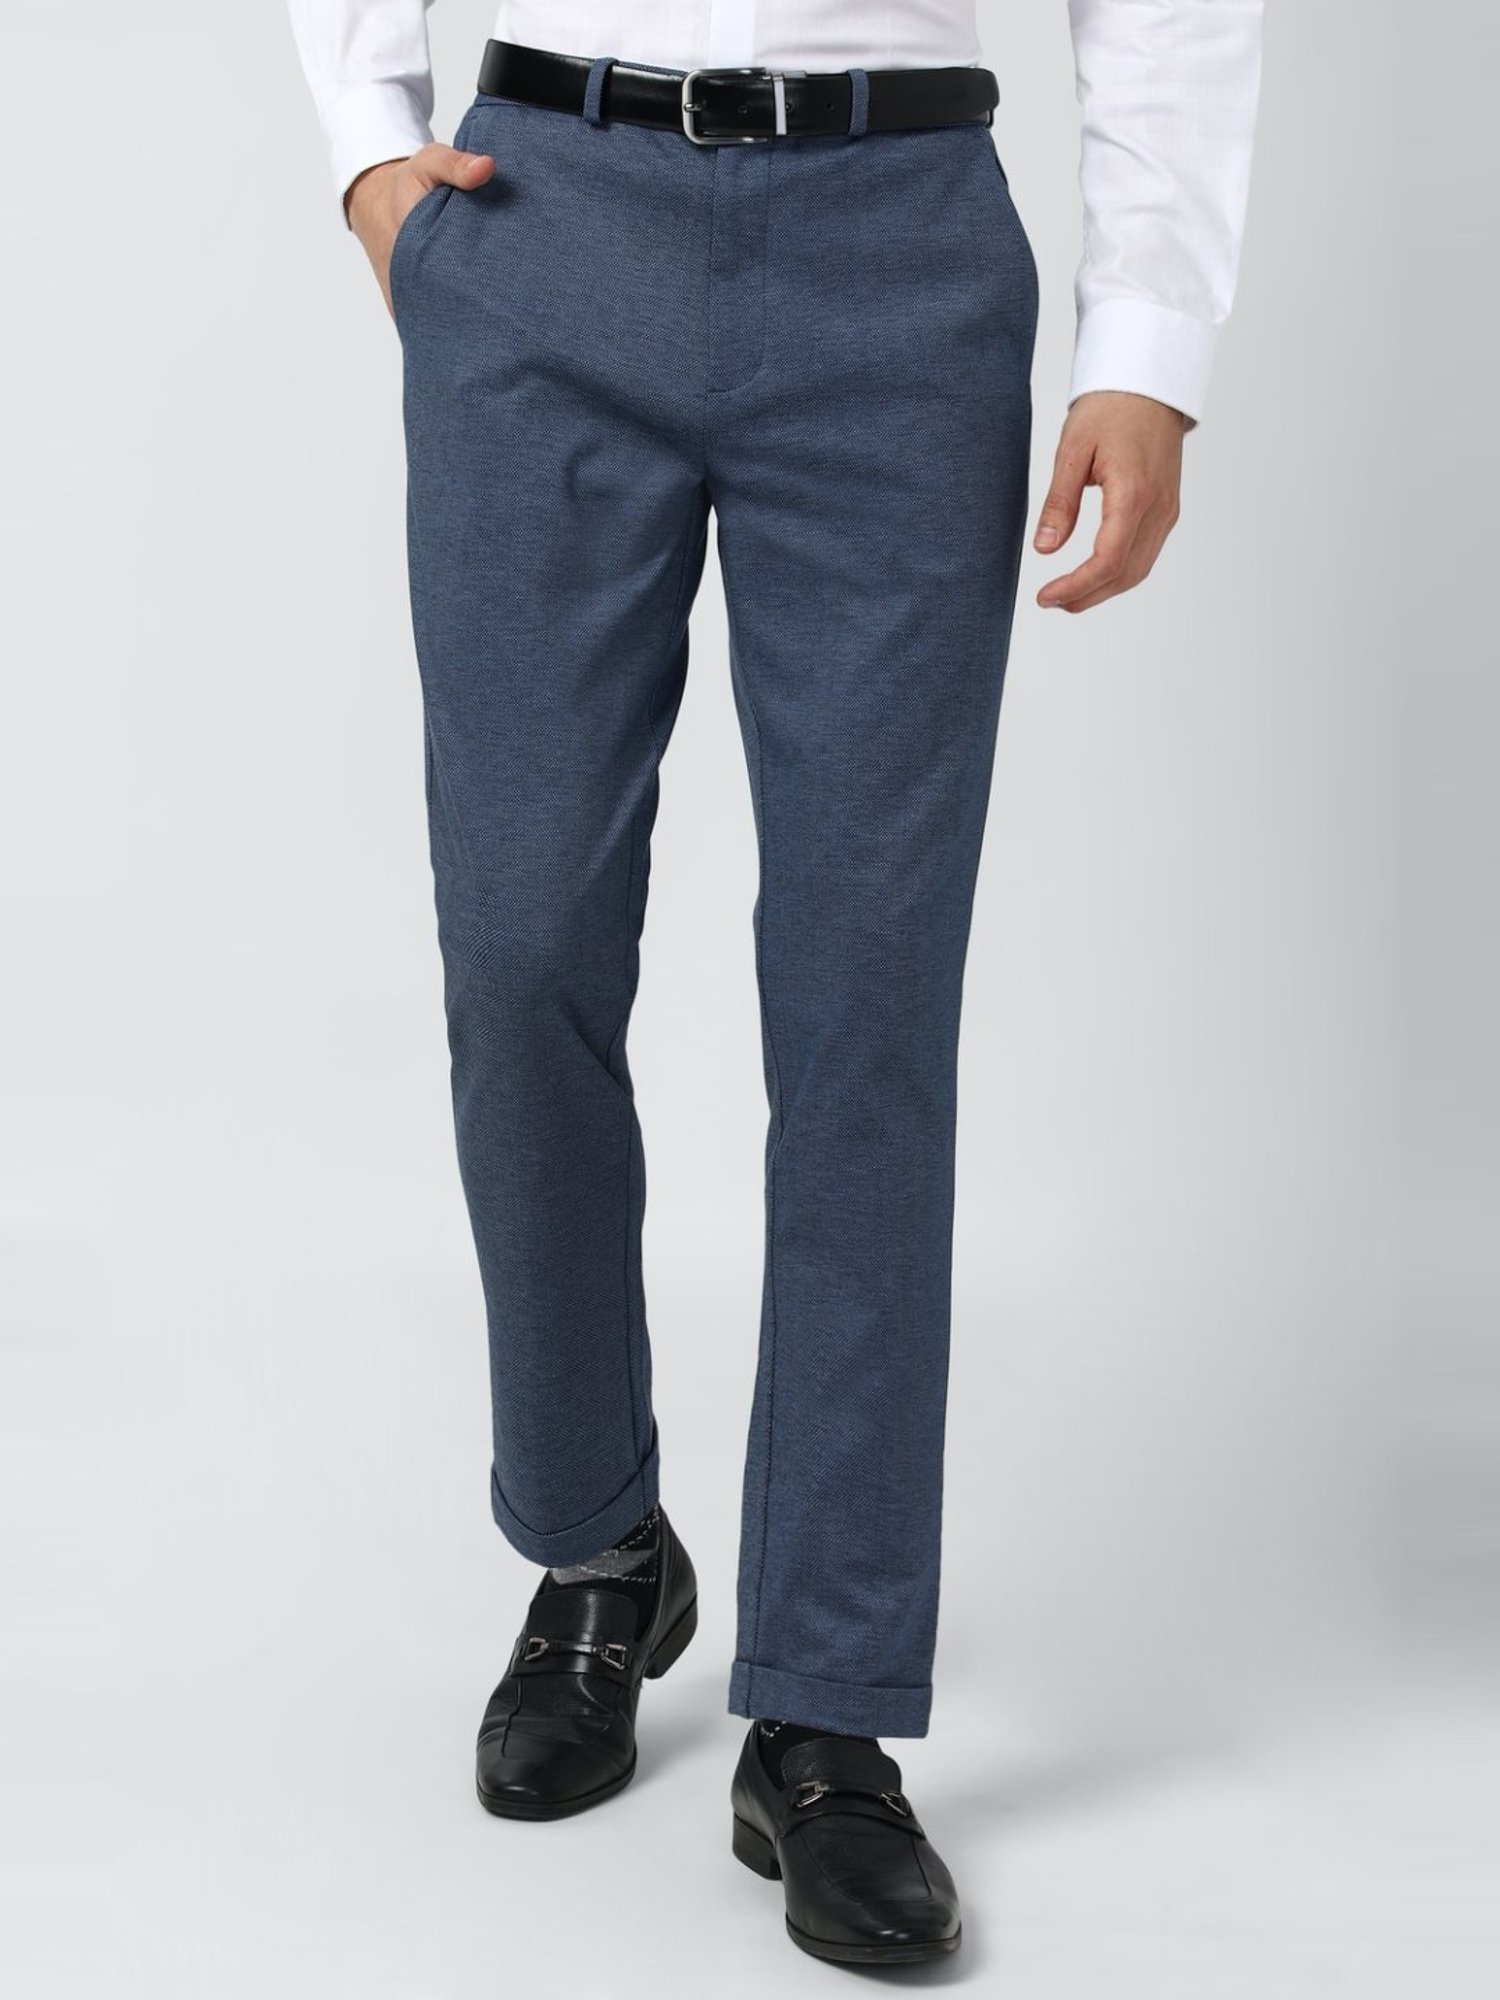 Buy Men Blue Solid Carrot Fit Casual Trousers Online  777070  Peter  England